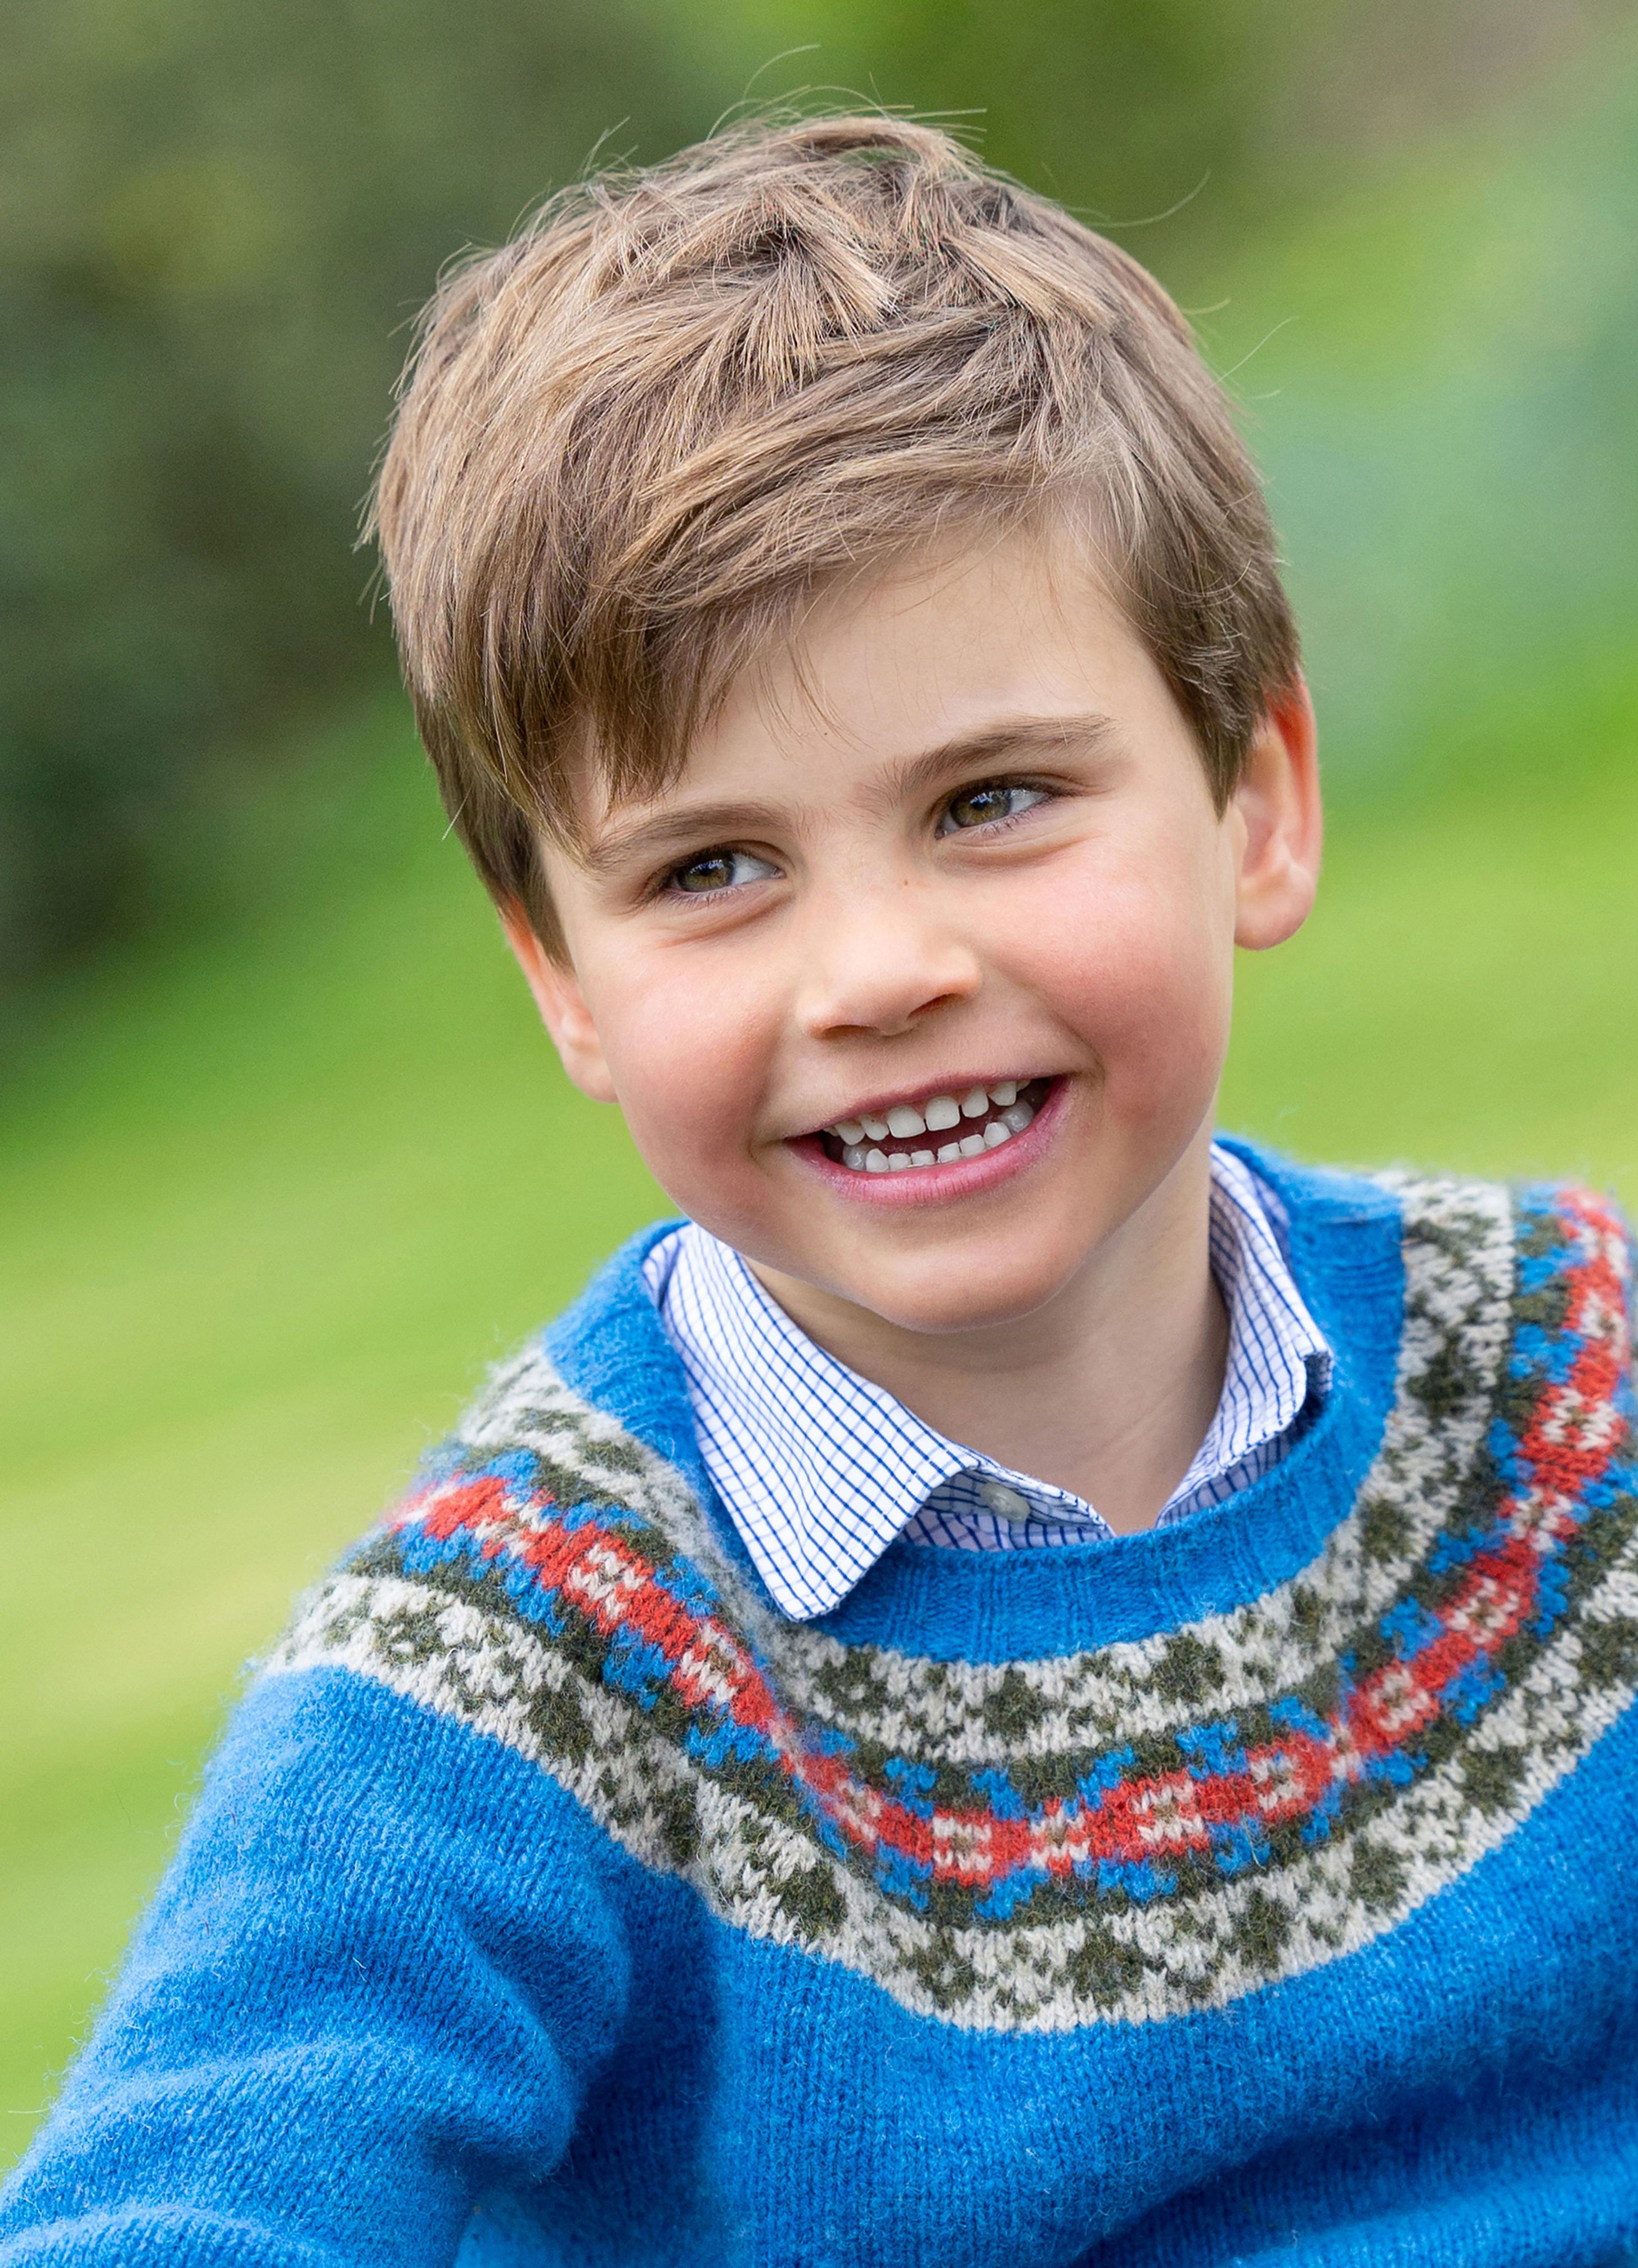 <p><span>Kensington Palace released this photo of Prince Louis -- which was taken by photographer Millie Pilkington in Windsor, England -- to mark his 5th birthday on April 23, 2023. </span></p>